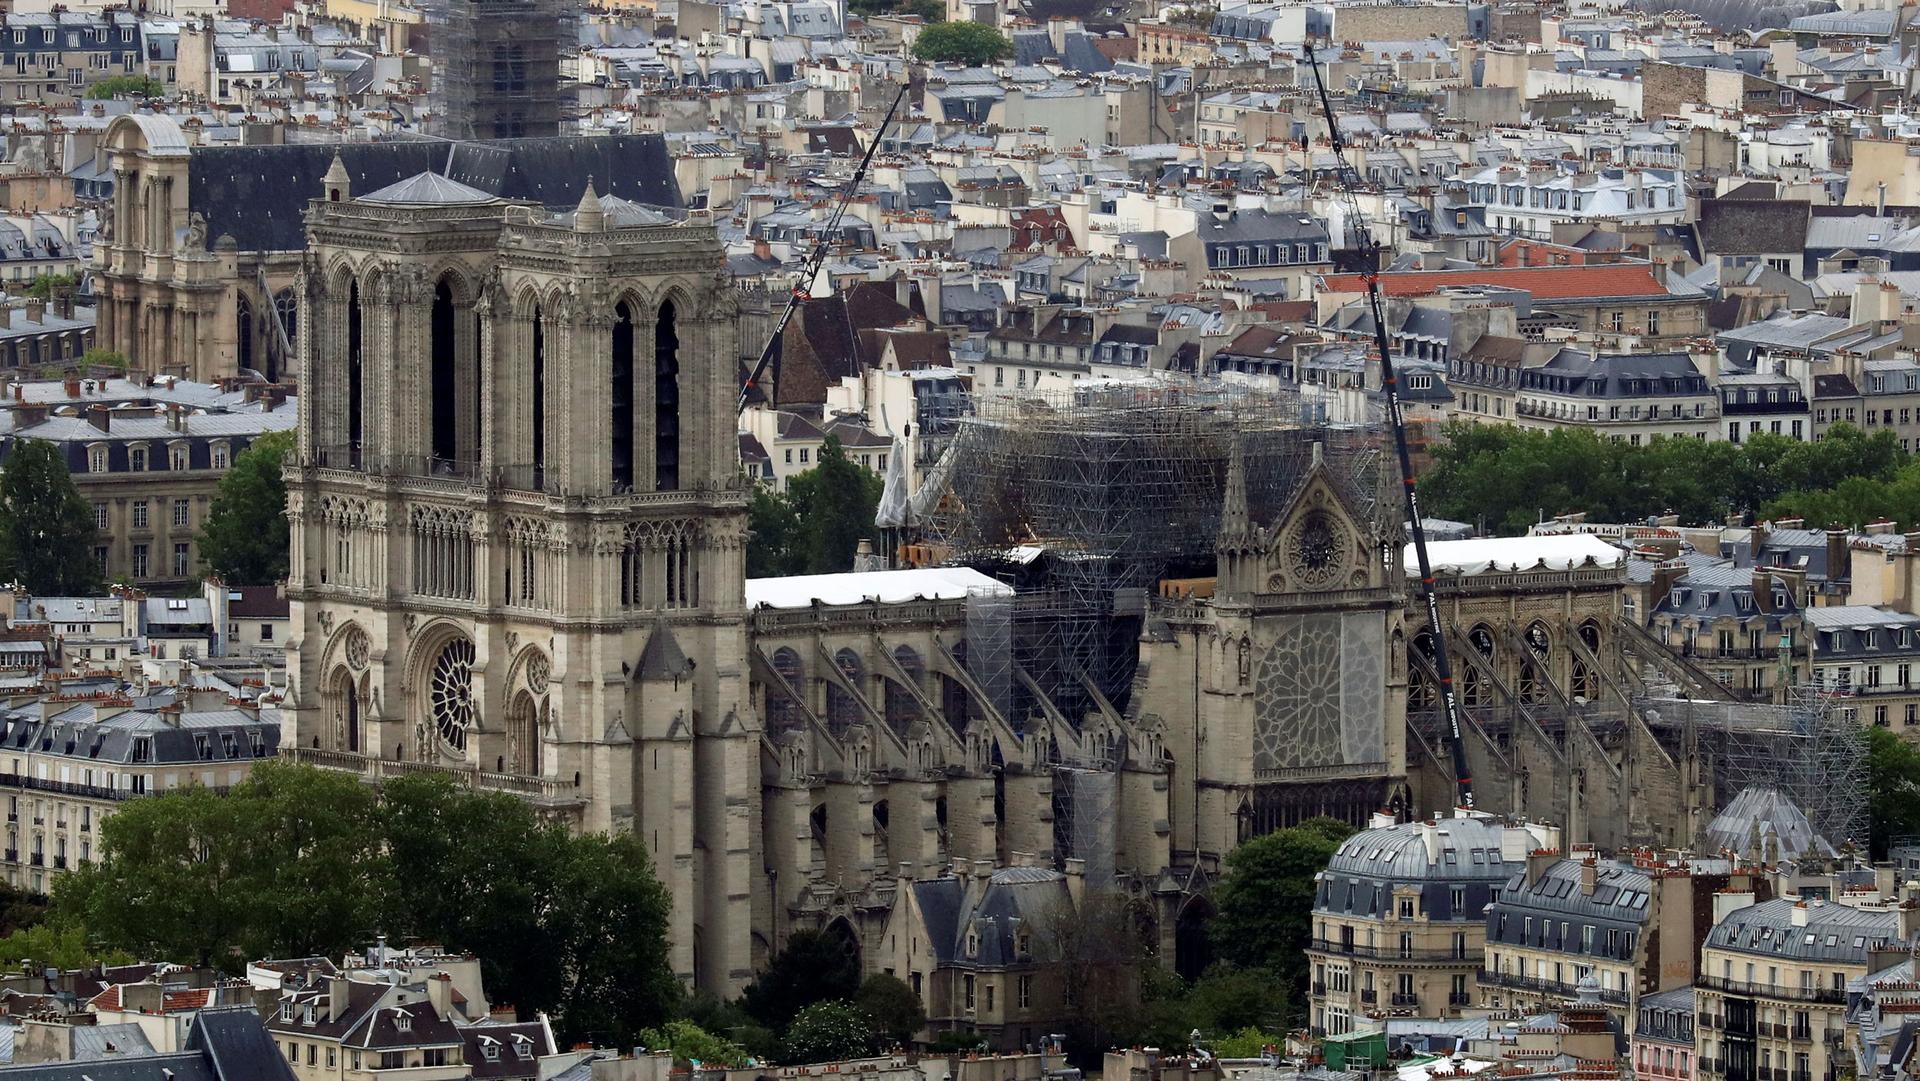 Notre Dame is shown in scaffolding after its recent fire.